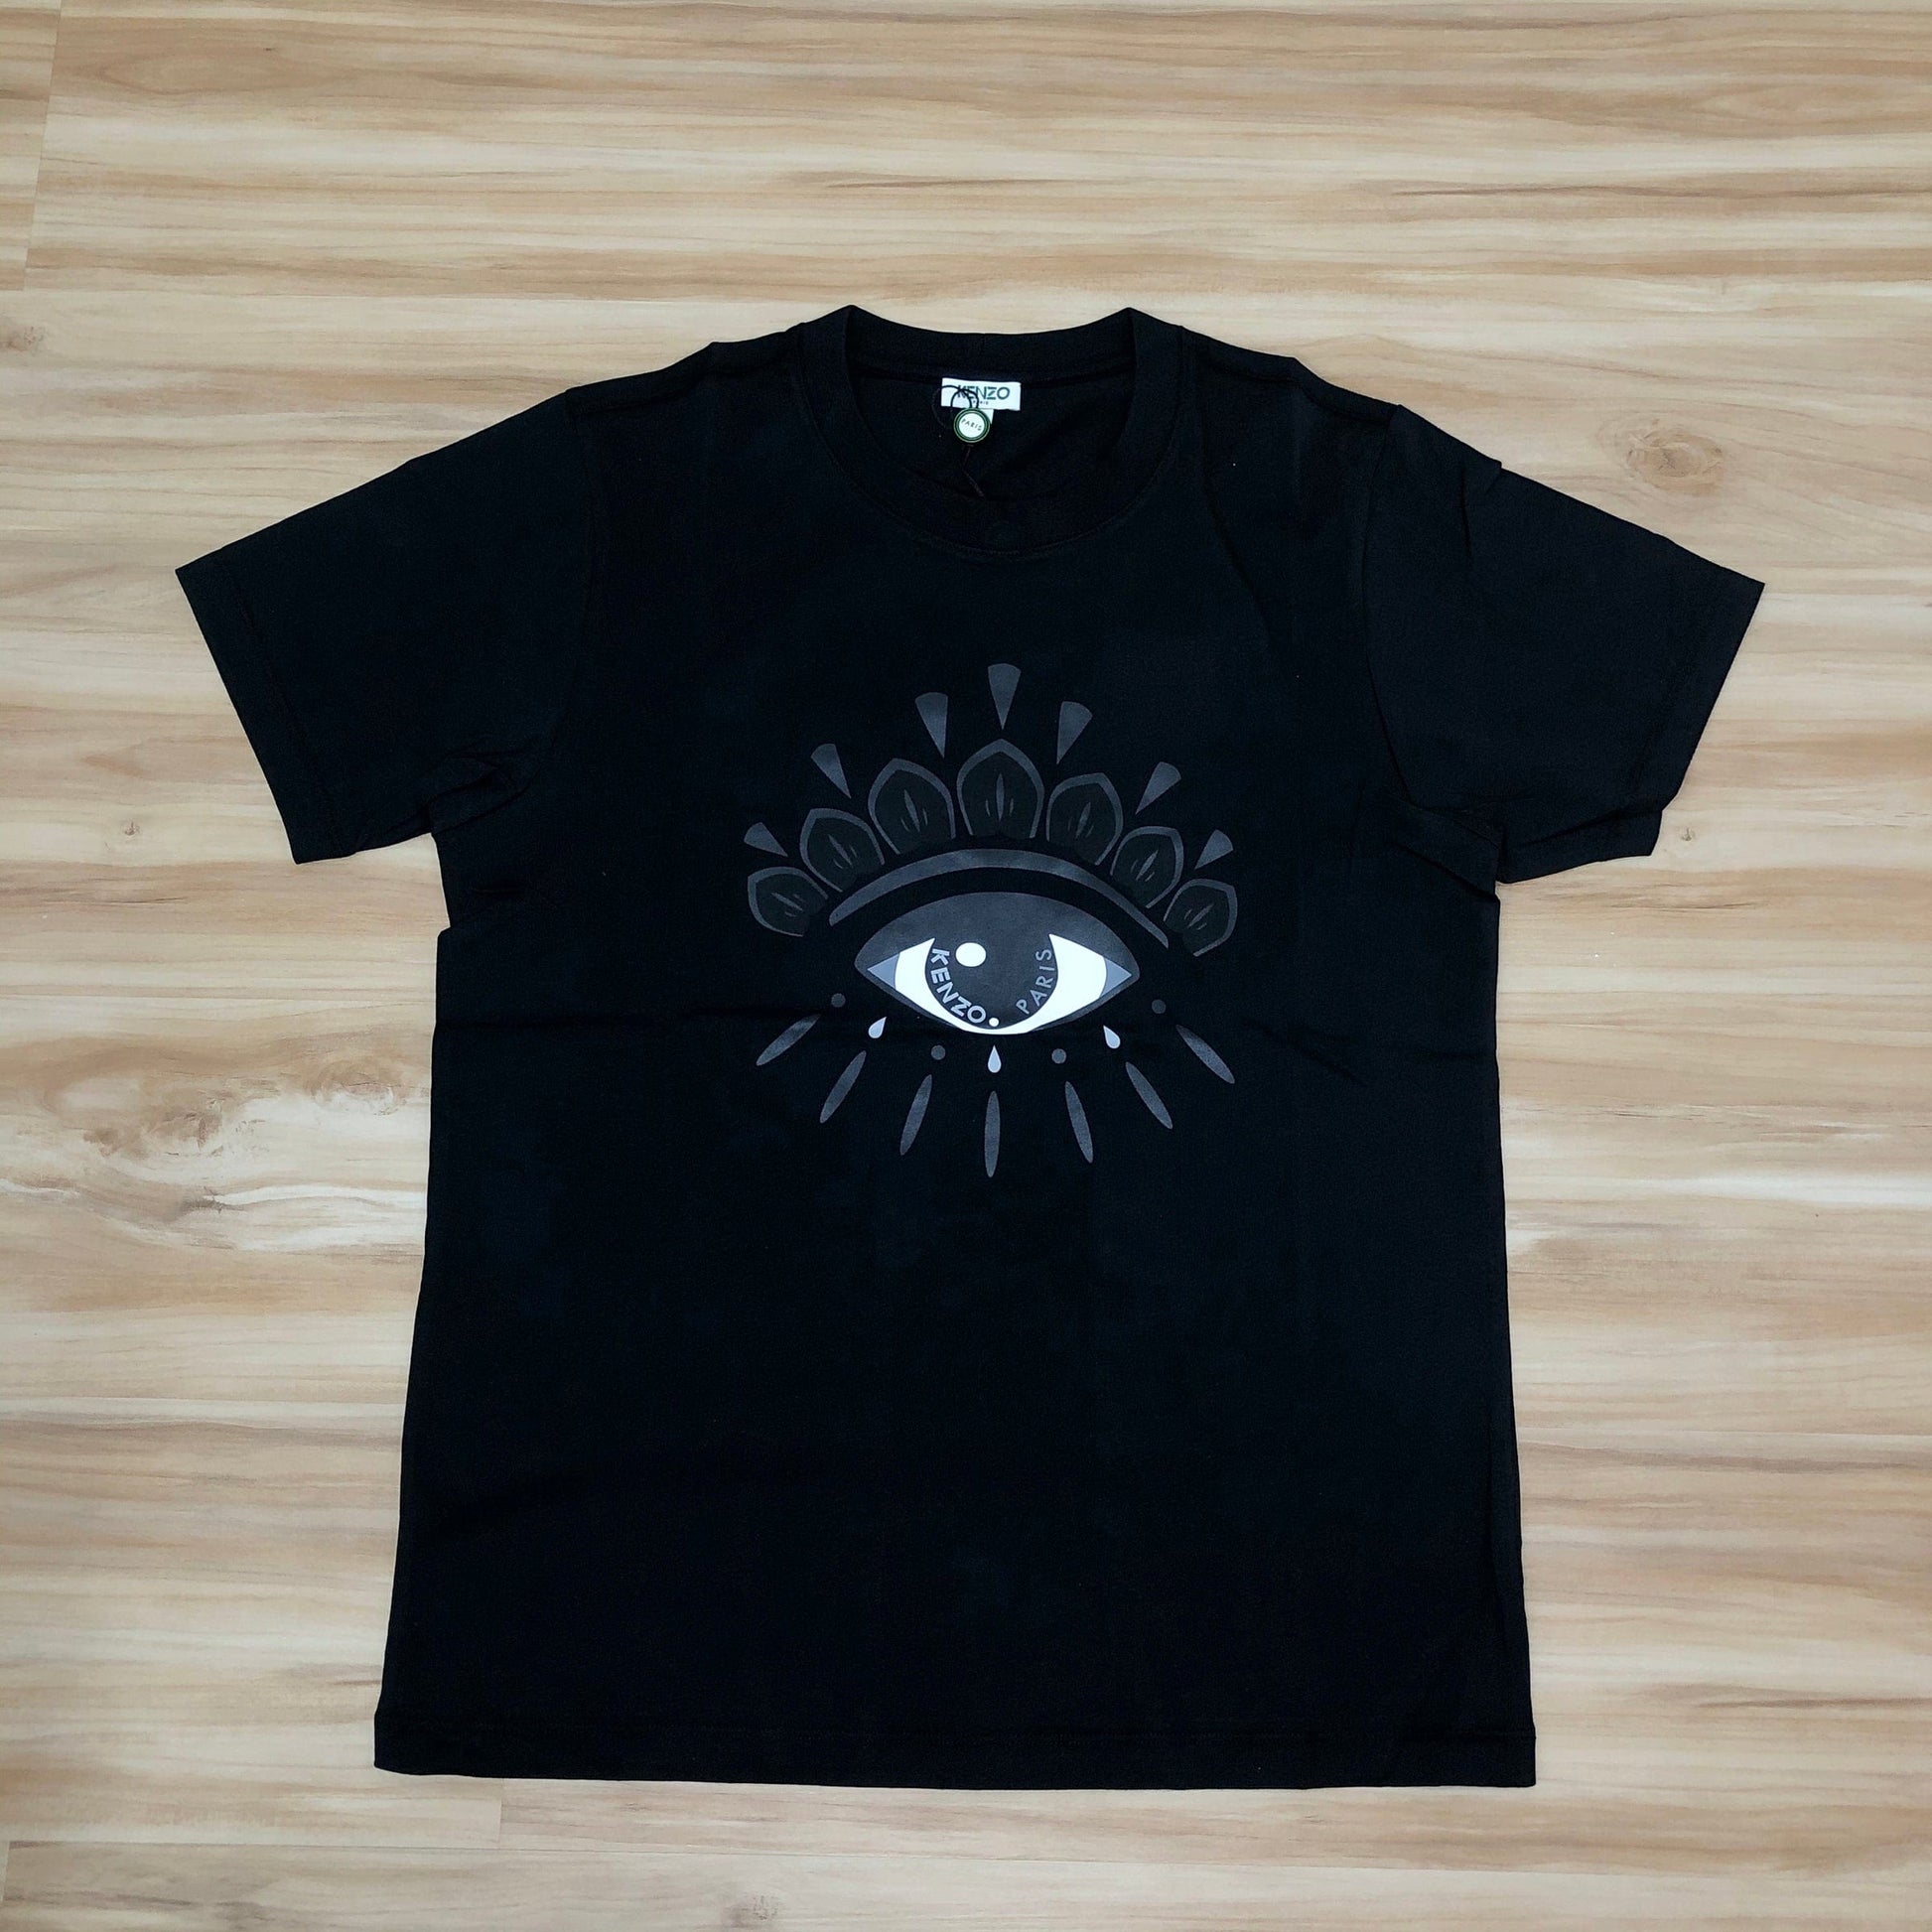 Kenzo Black Eye Logo T-Shirt - Shop Streetwear, Sneakers, Slippers and Gifts online | Malaysia - The Factory KL